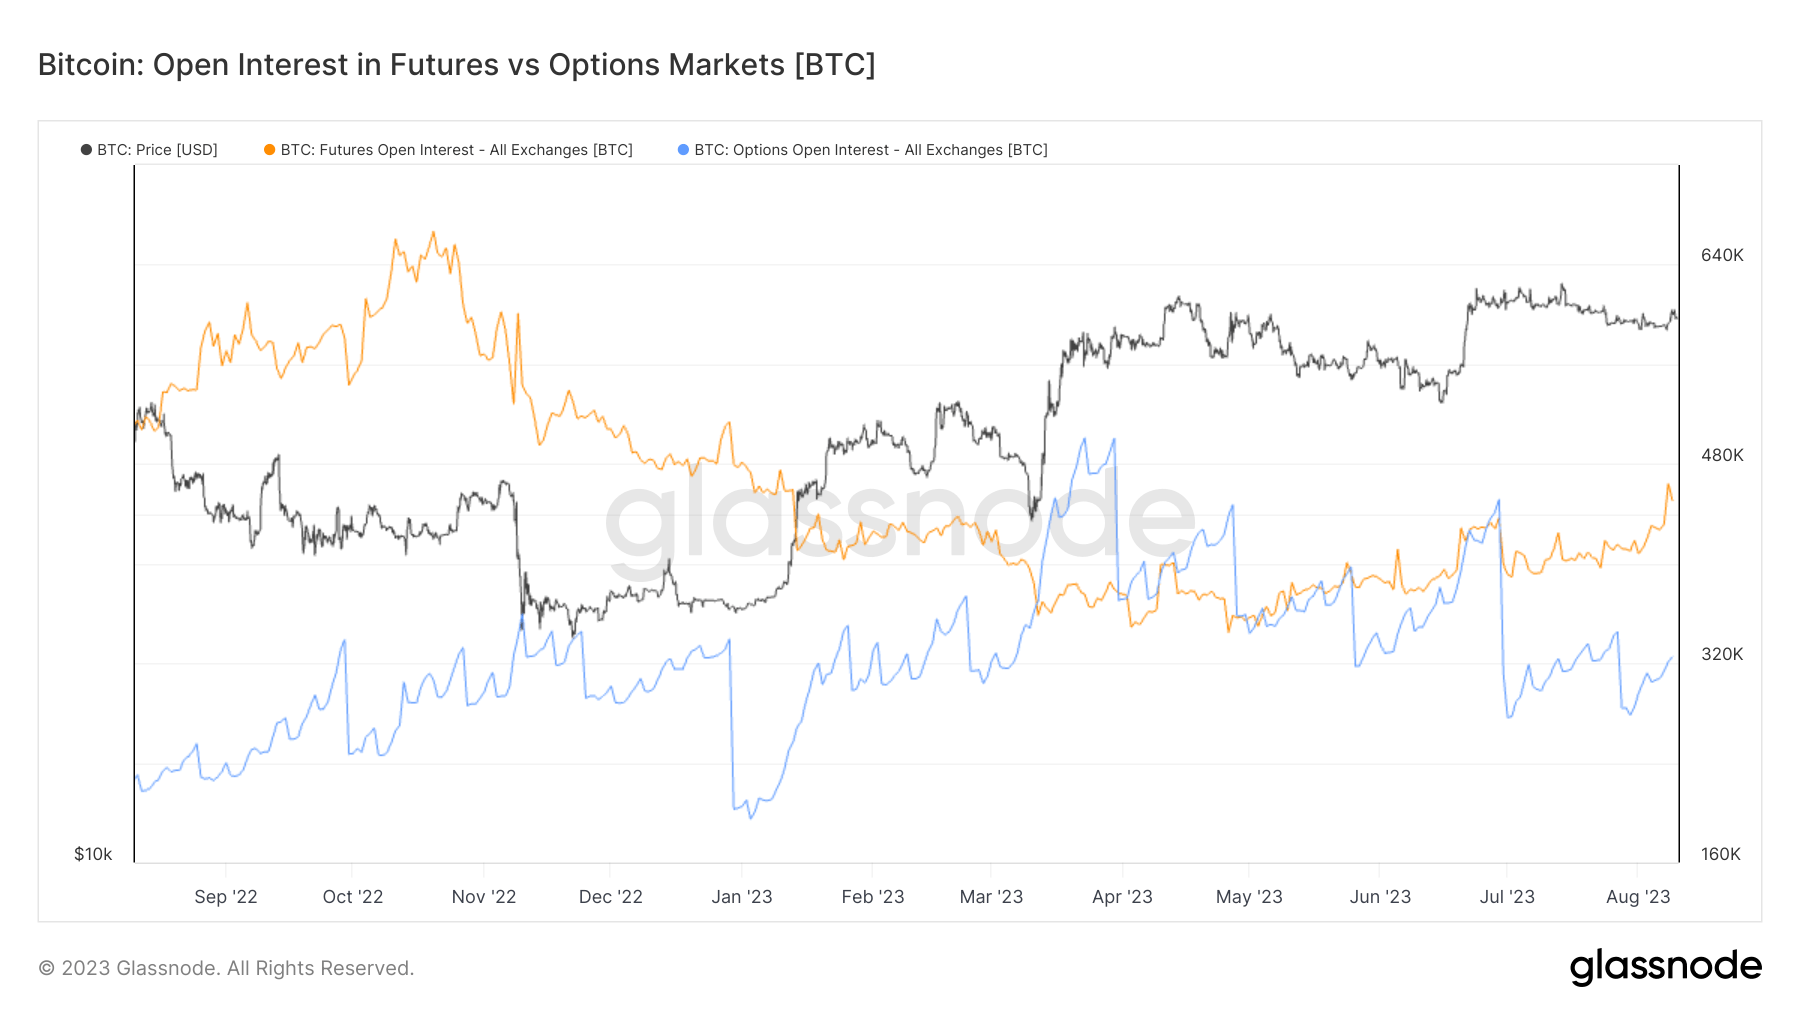 The changing landscape of Bitcoin futures and options markets